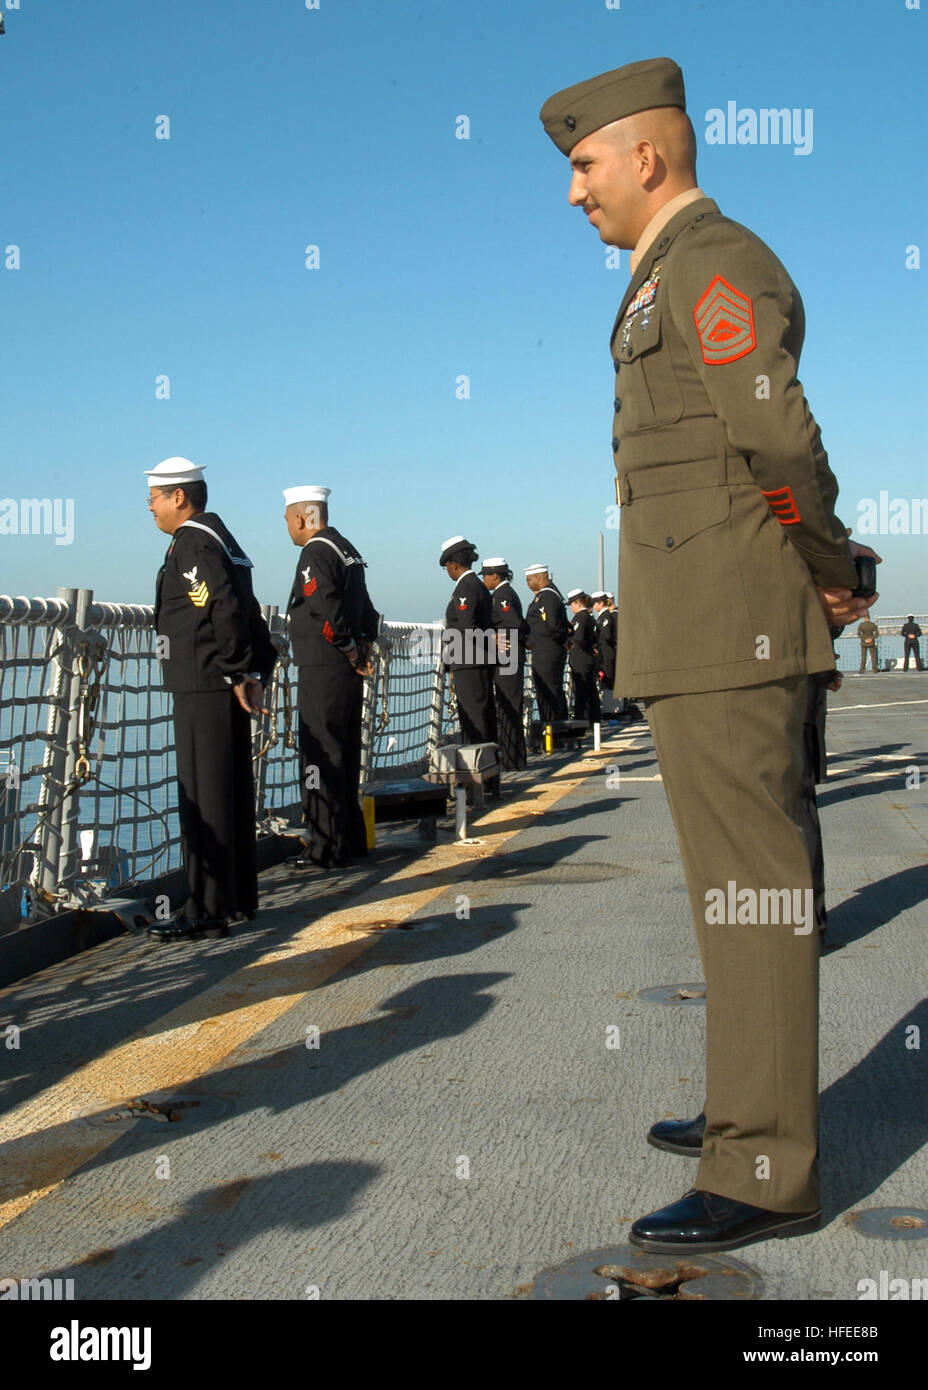 032807-N-7029R-024 SAN DIEGO (March 28, 2007) – Gunnery Sgt. Octavio Gonzalez looks on as Sailors man the rails on board USS Pearl Harbor (LSD 52) during the departure ceremony. The dock landing ship is scheduled to participate in Partnership of the Americas (POA) 2007. POA 2007 will focus on enhancing relationships with regional partner nations during a variety of exercises and events at sea and on shore through out Latin America and the Caribbean. U.S. Navy photo by Mass Communication Specialist 2nd Class Alexia M. Riveracorrea (RELEASED) US Navy 032807-N-7029R-024 Gunnery Sgt. Octavio Gonza Stock Photo